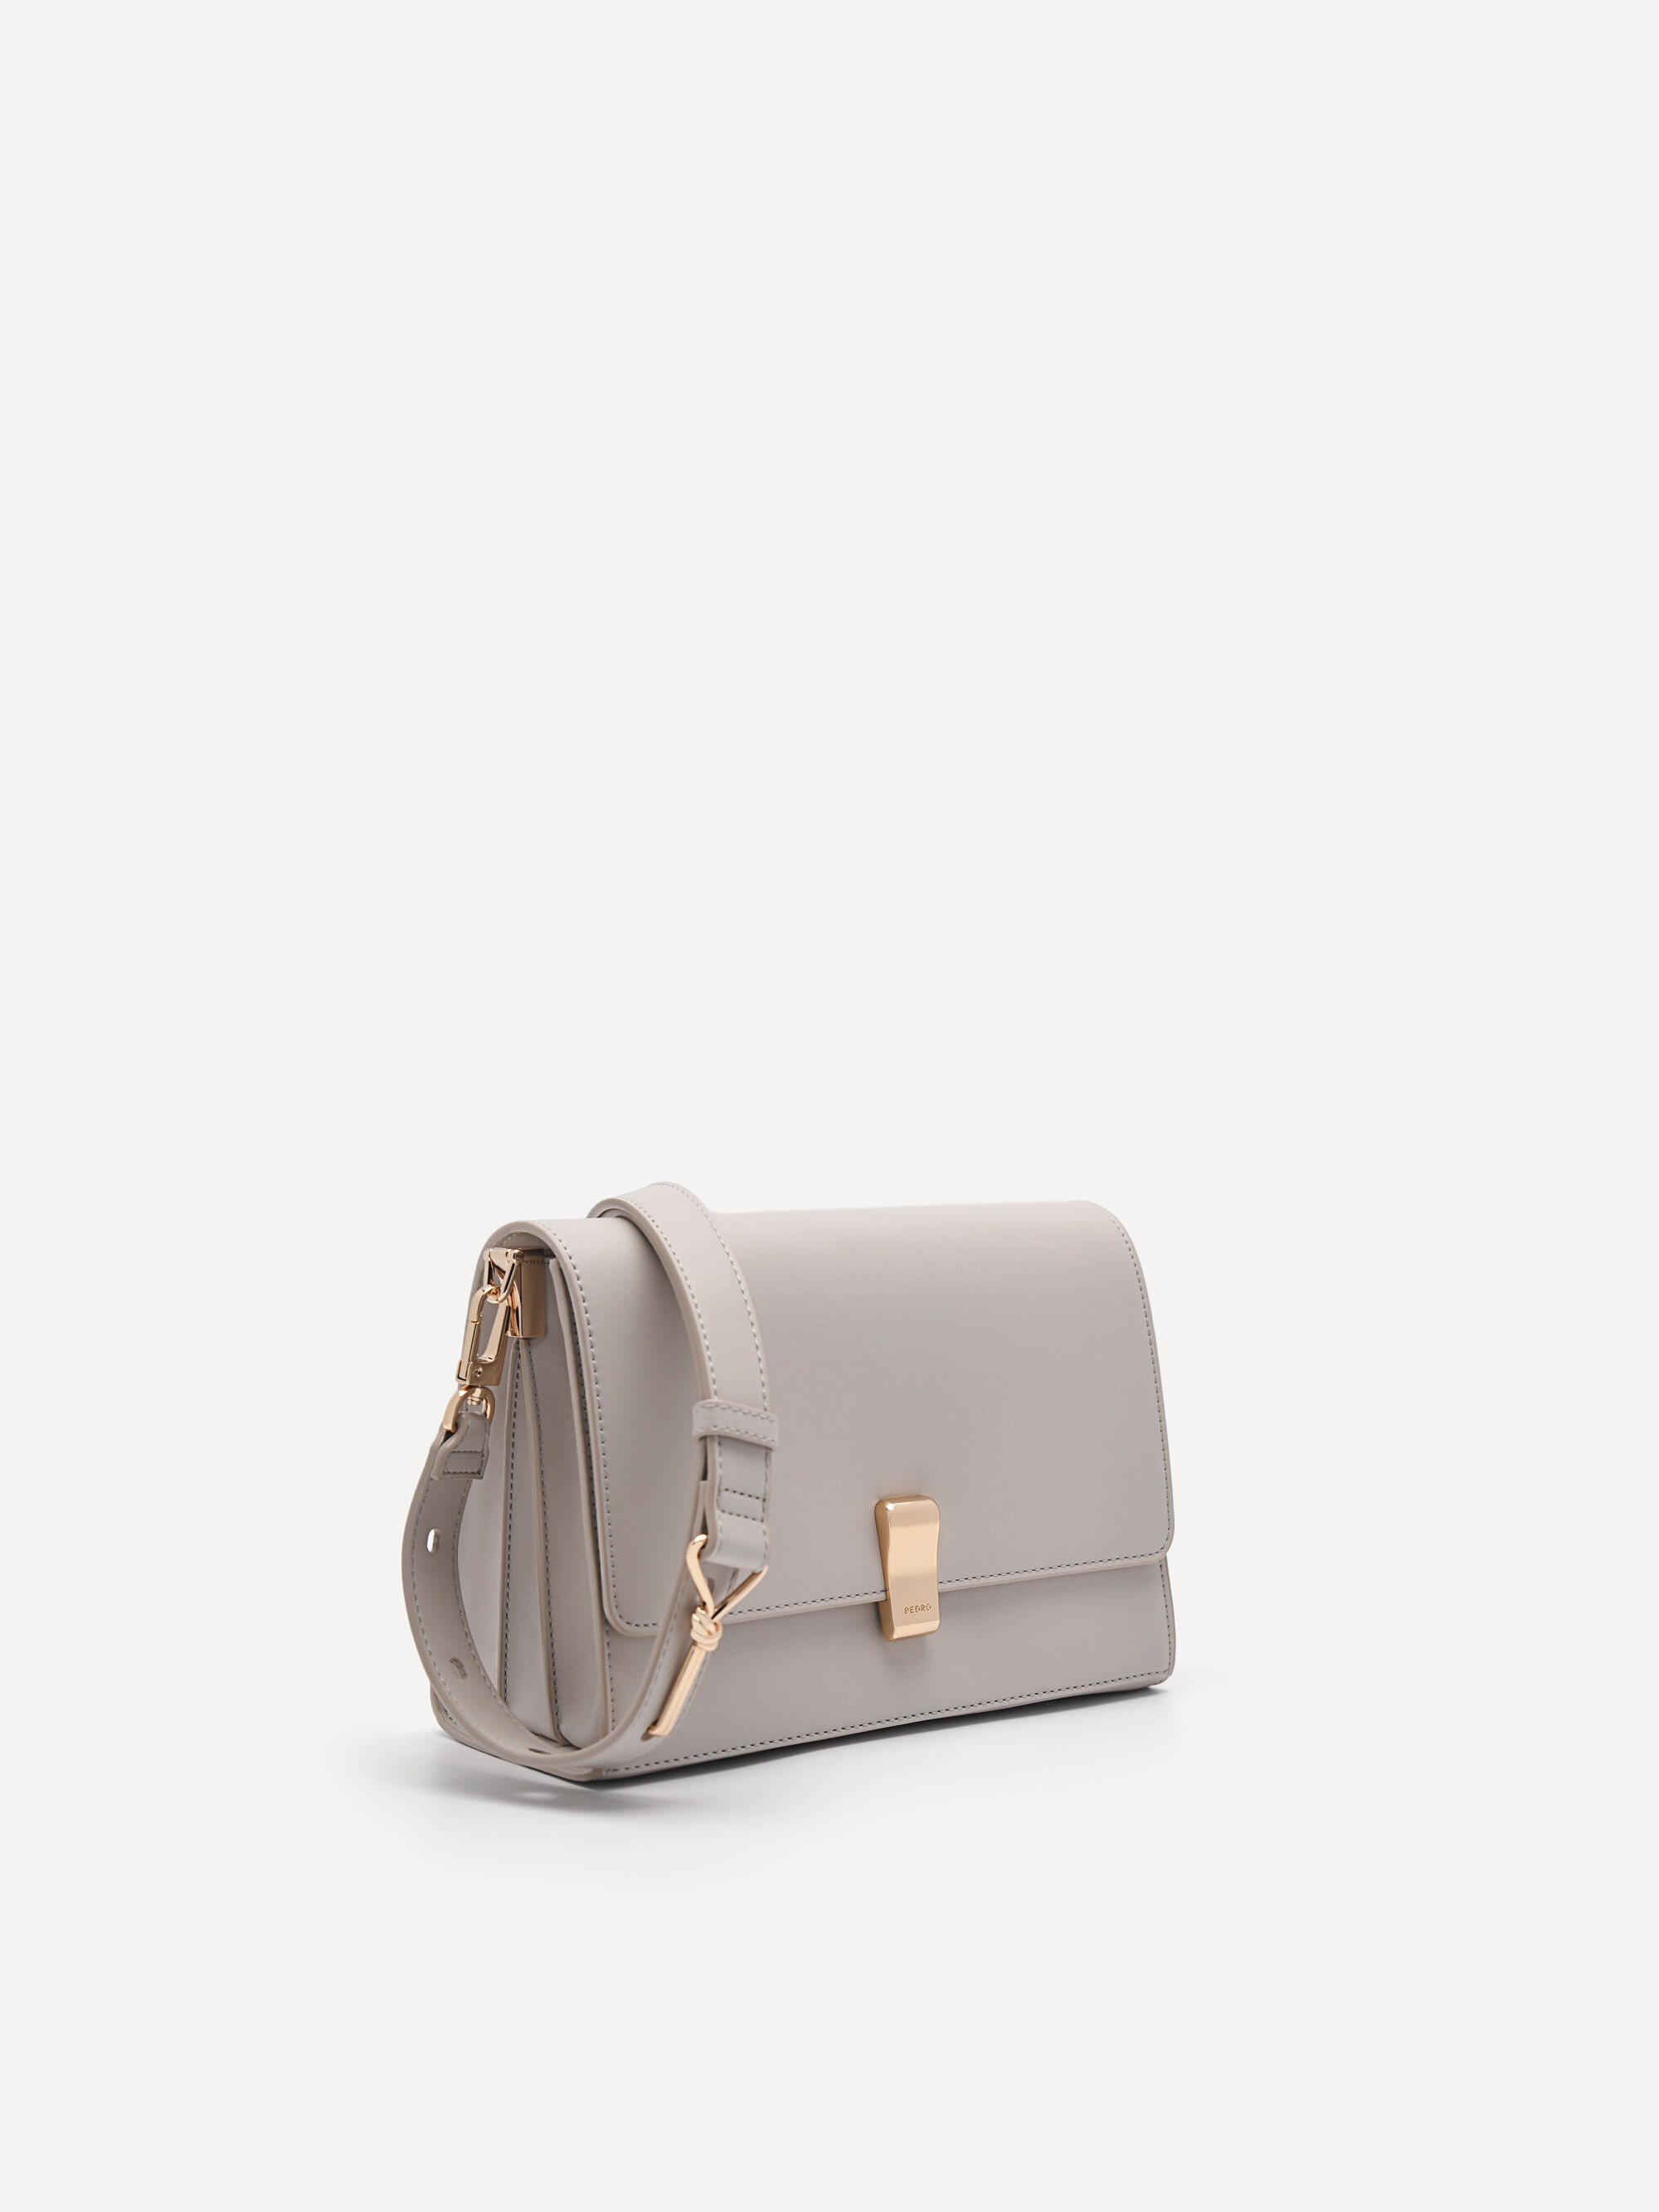 The Prototype Shoulder Bag- Taupe - Add to Cart to Reveal Special Black Friday Price!